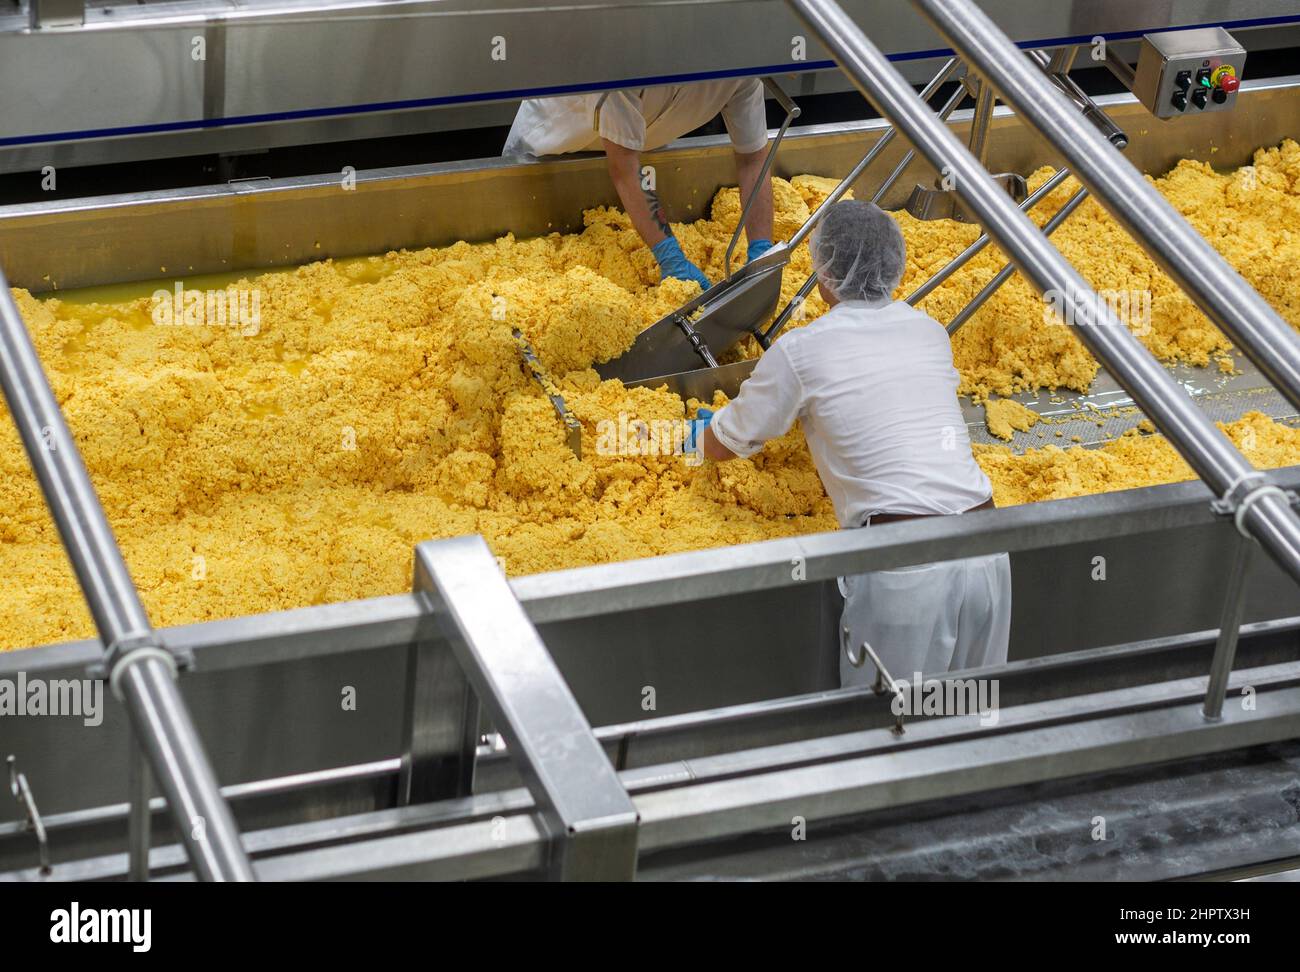 Turning the Curds at the St Albert Cheese Coop: Two workers turn and break up the foming cheese curds at a producton line for cheese the Coop factory. Stock Photo